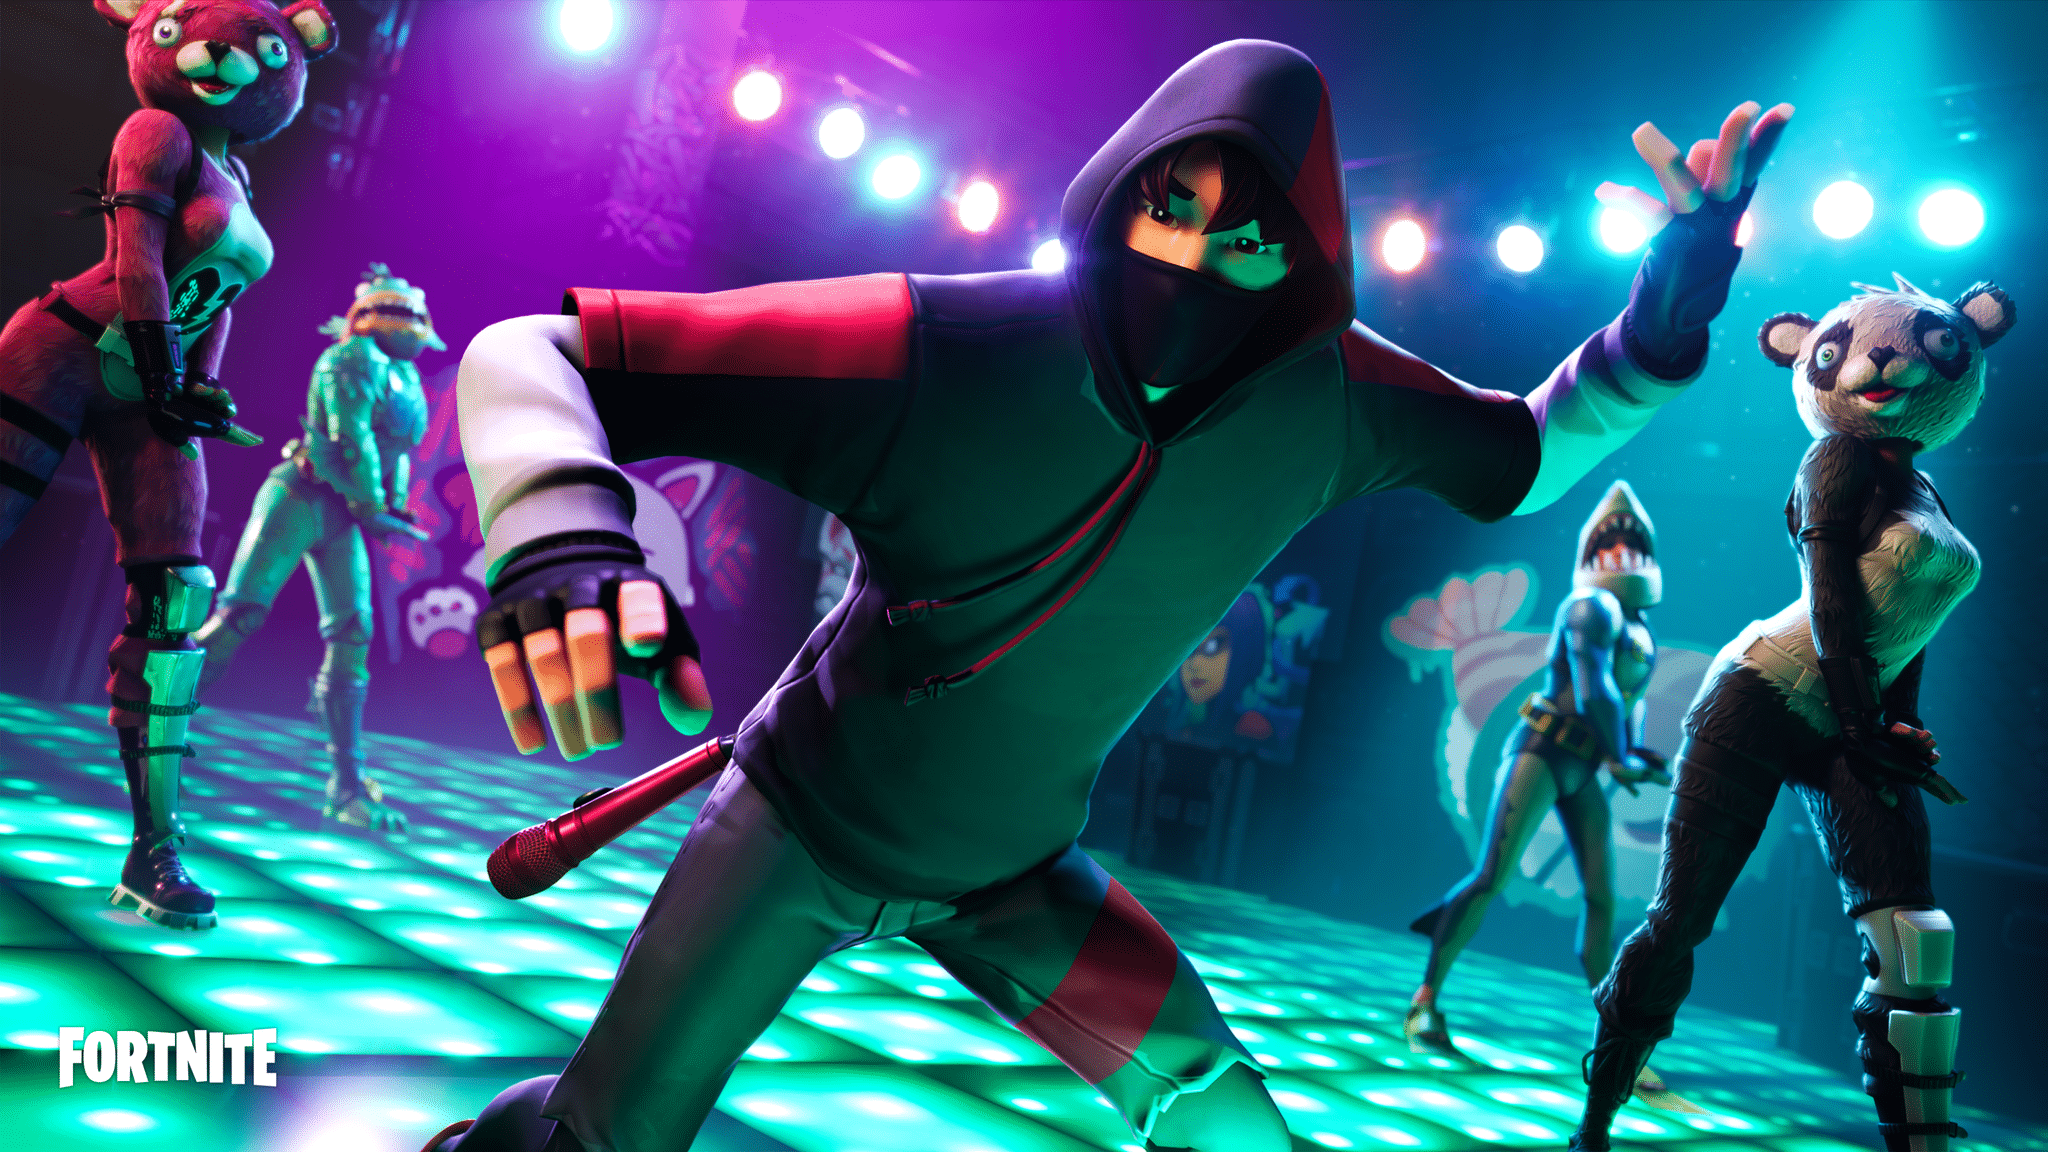 Samsung Brings K Pop To Fortnite With Exclusive IKONIK Outfit